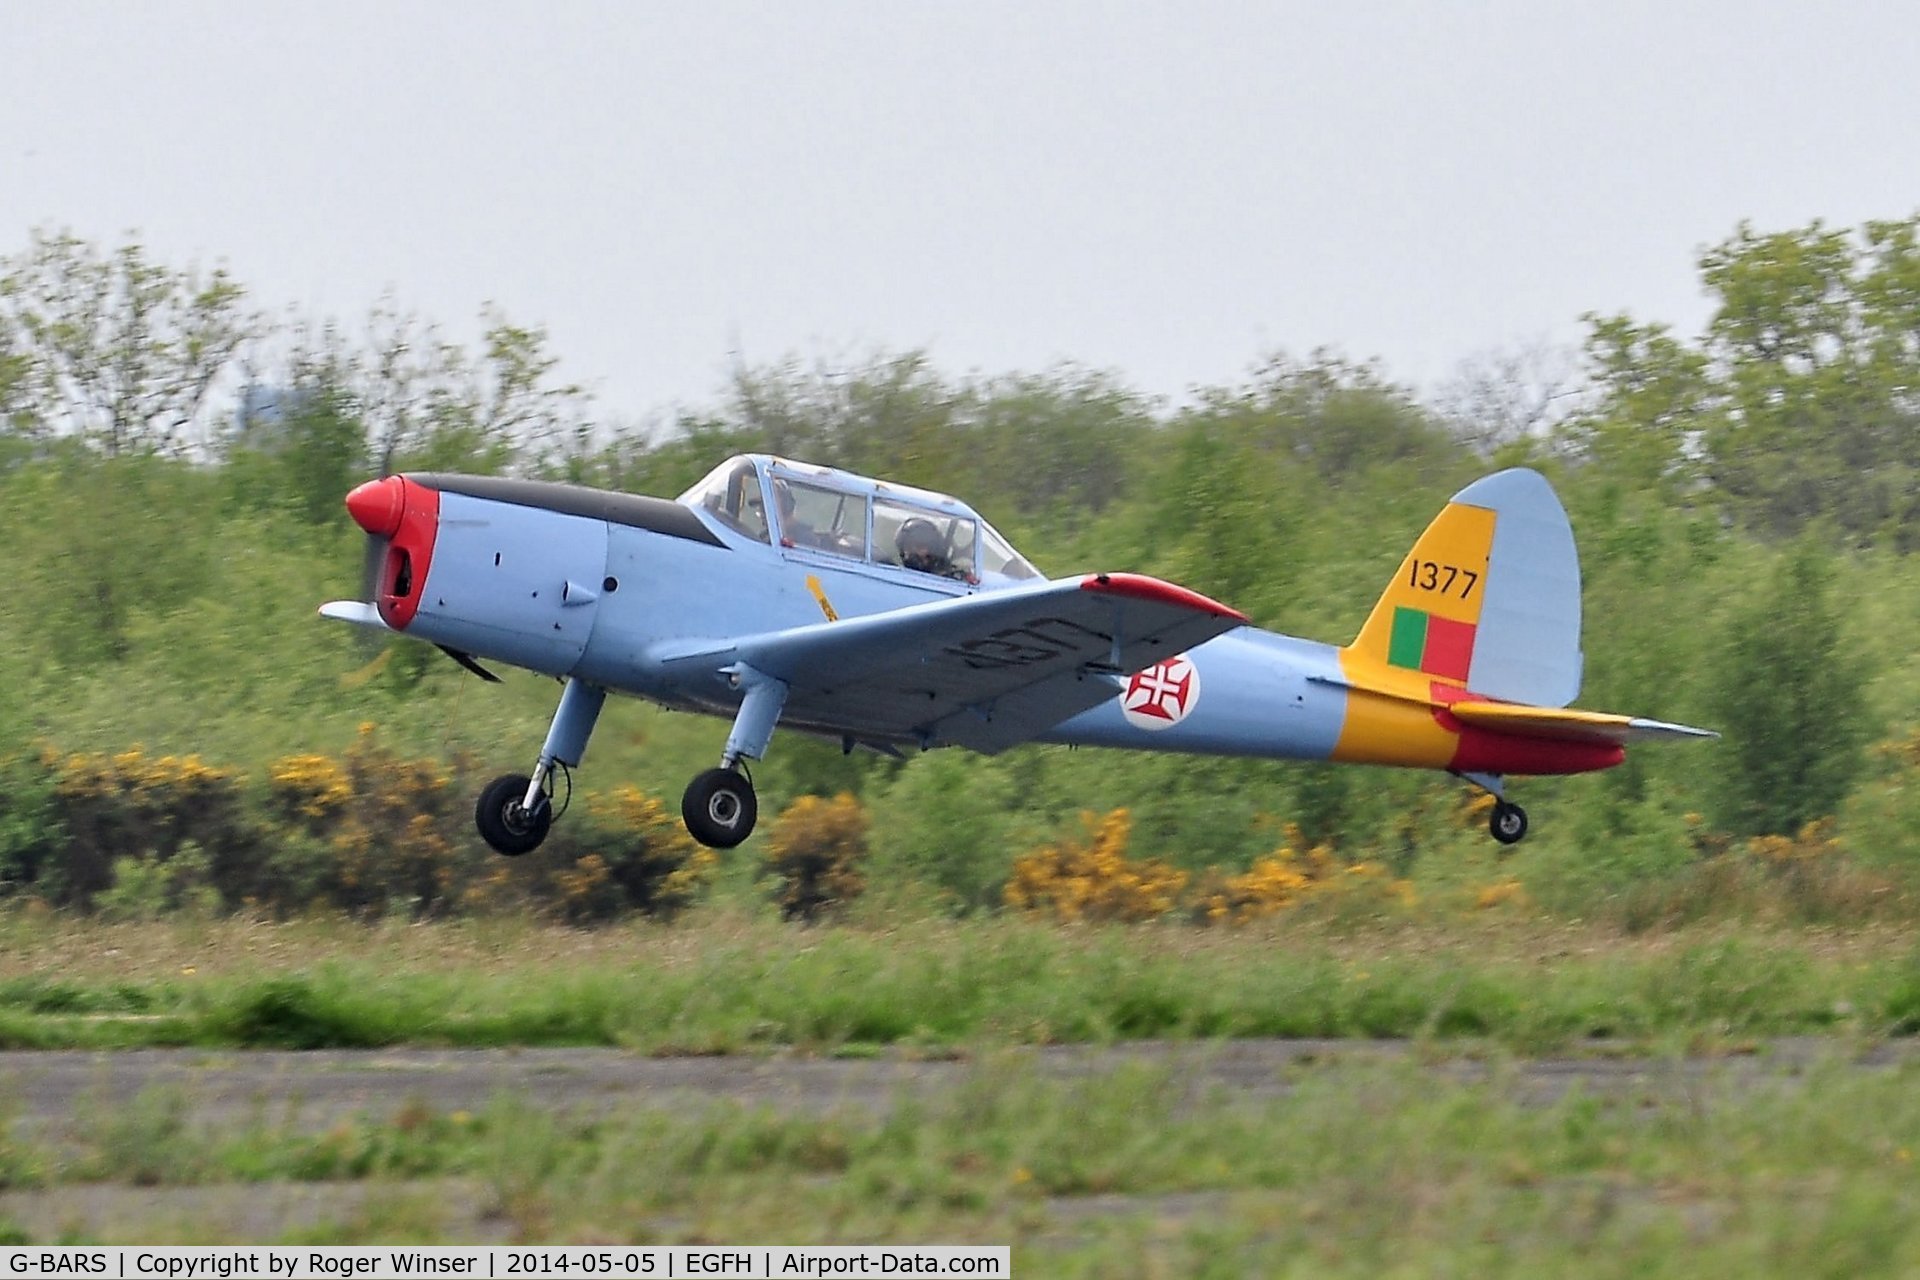 G-BARS, 1952 De Havilland DHC-1 Chipmunk T.10 C/N C1/0557, Visiting Chipmunk departing Runway 10. The aircraft served in the RAF as WK520. Painted to represent a Chipmunk in the Portuguese Air Force with the s/n 1377. 